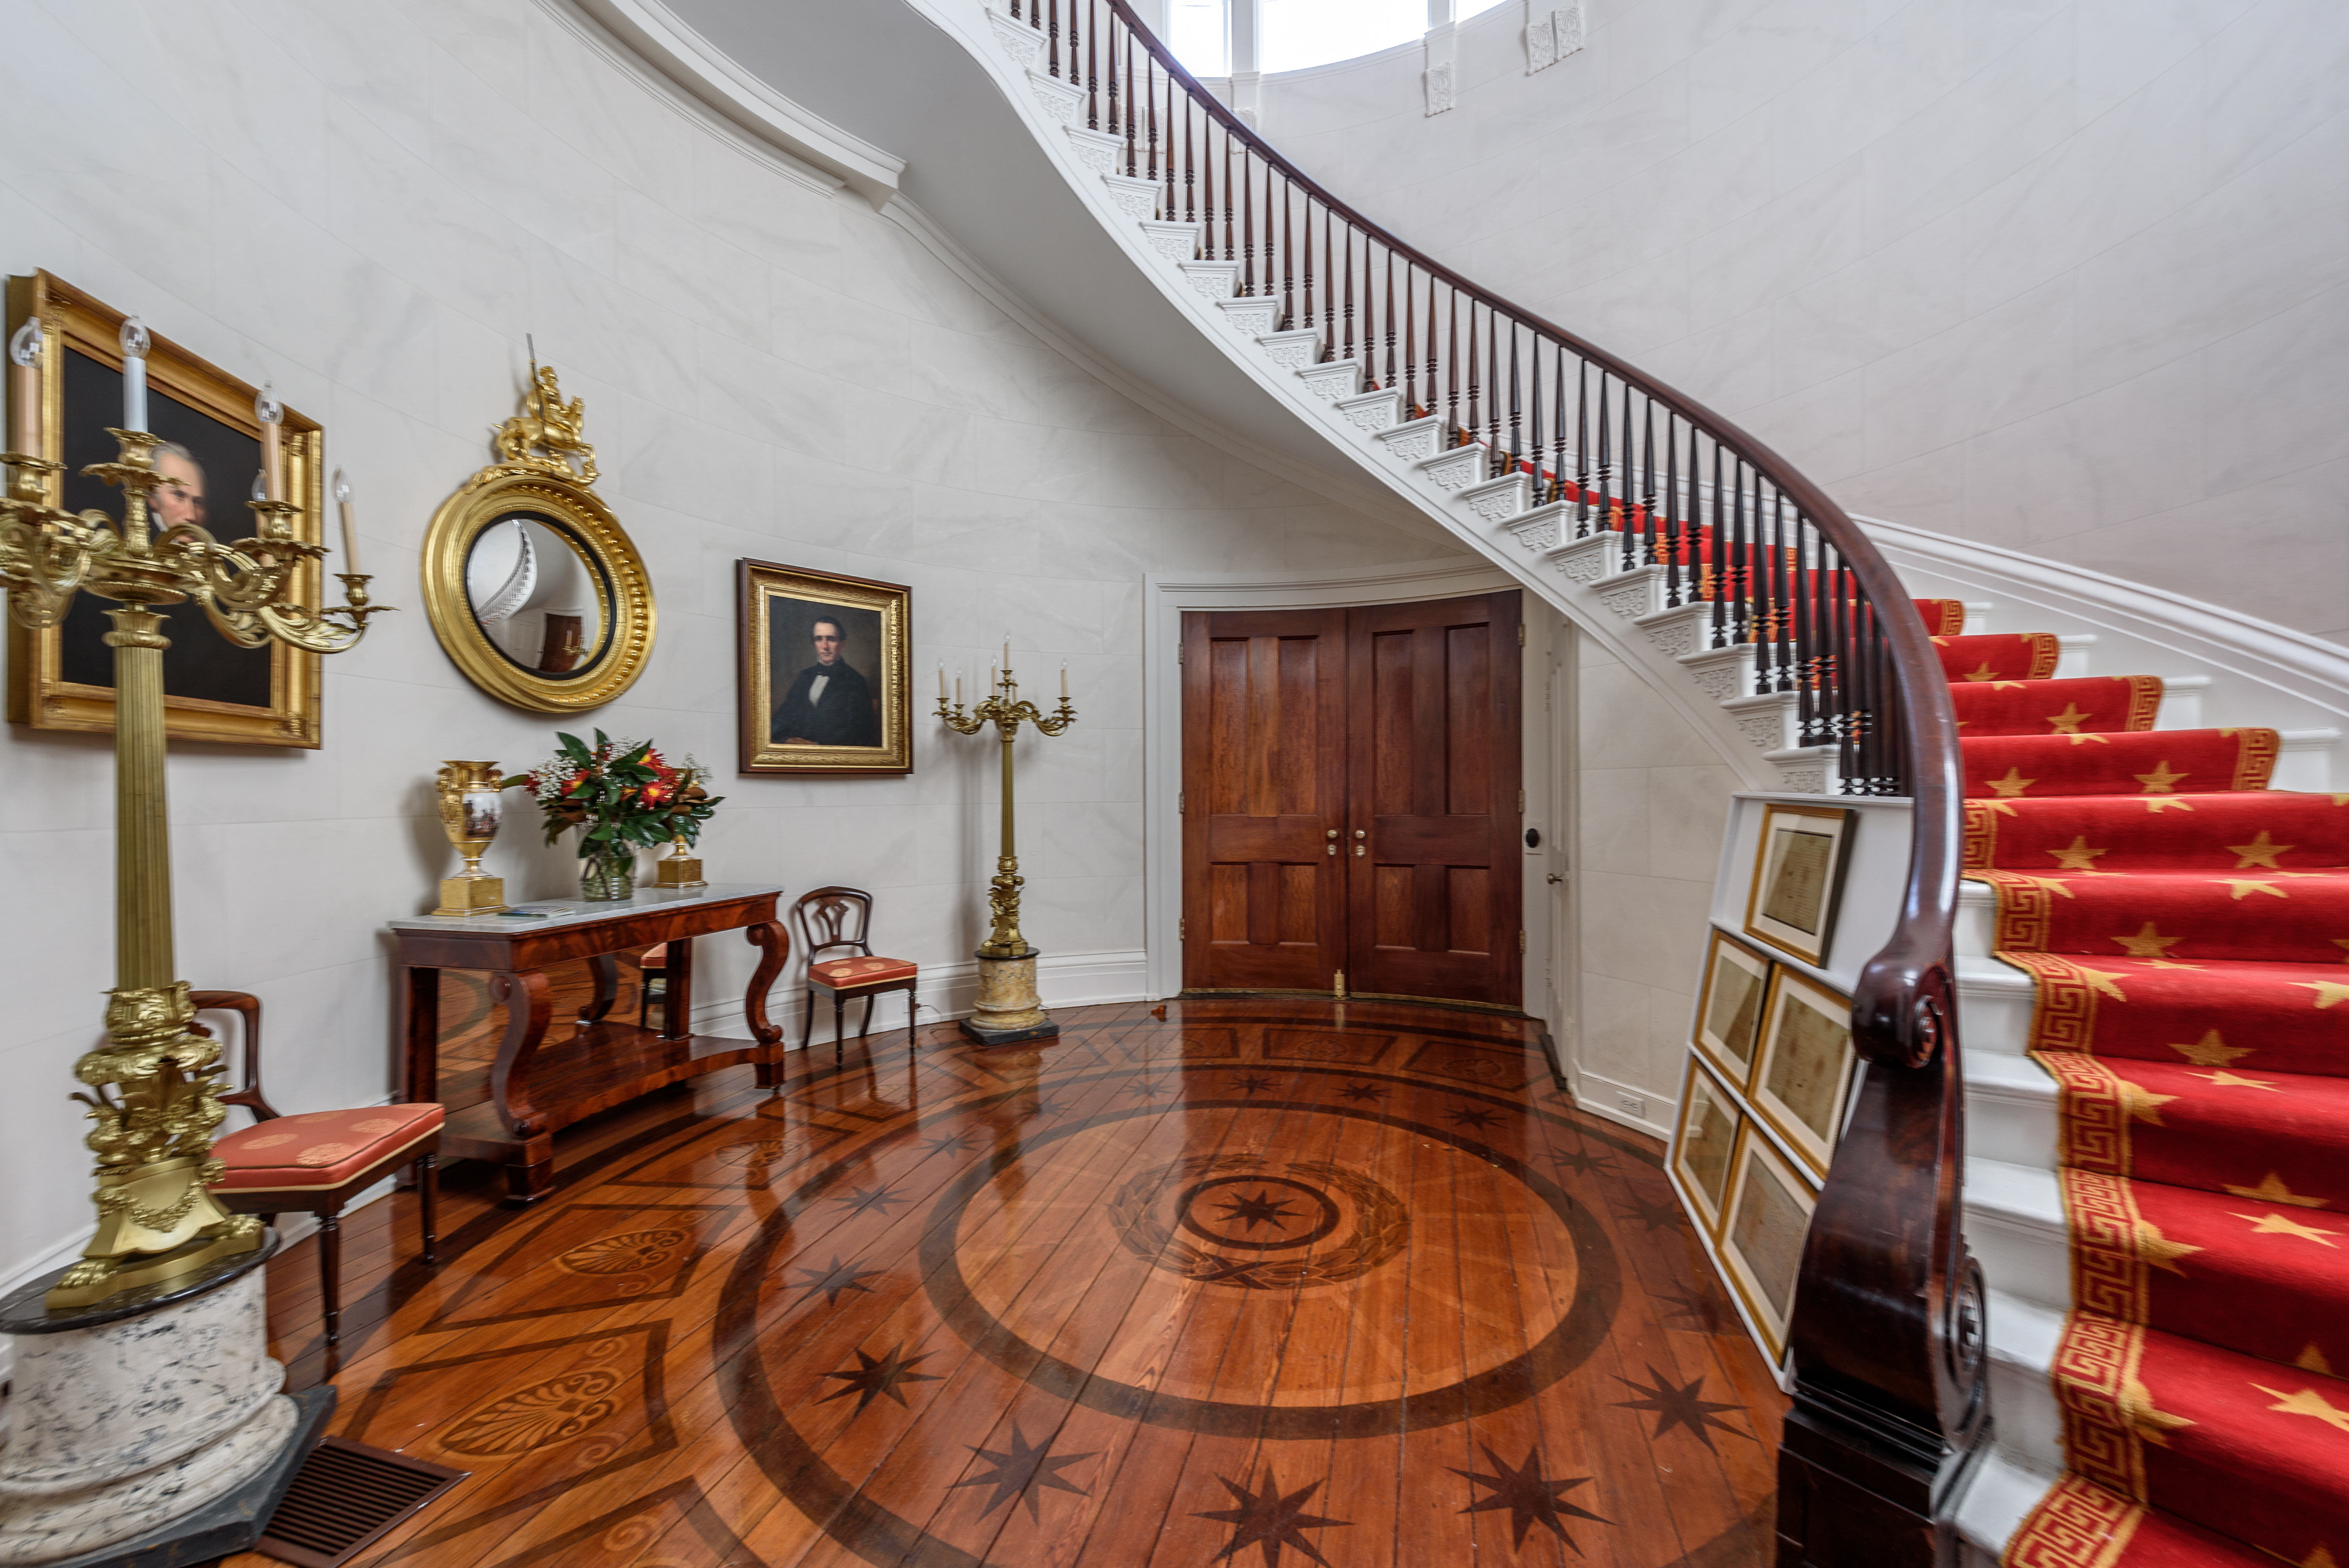 Millford’s back entrance opens to a sweeping spiral staircase and trompe l’oeil painted floor by Robert Jackson.